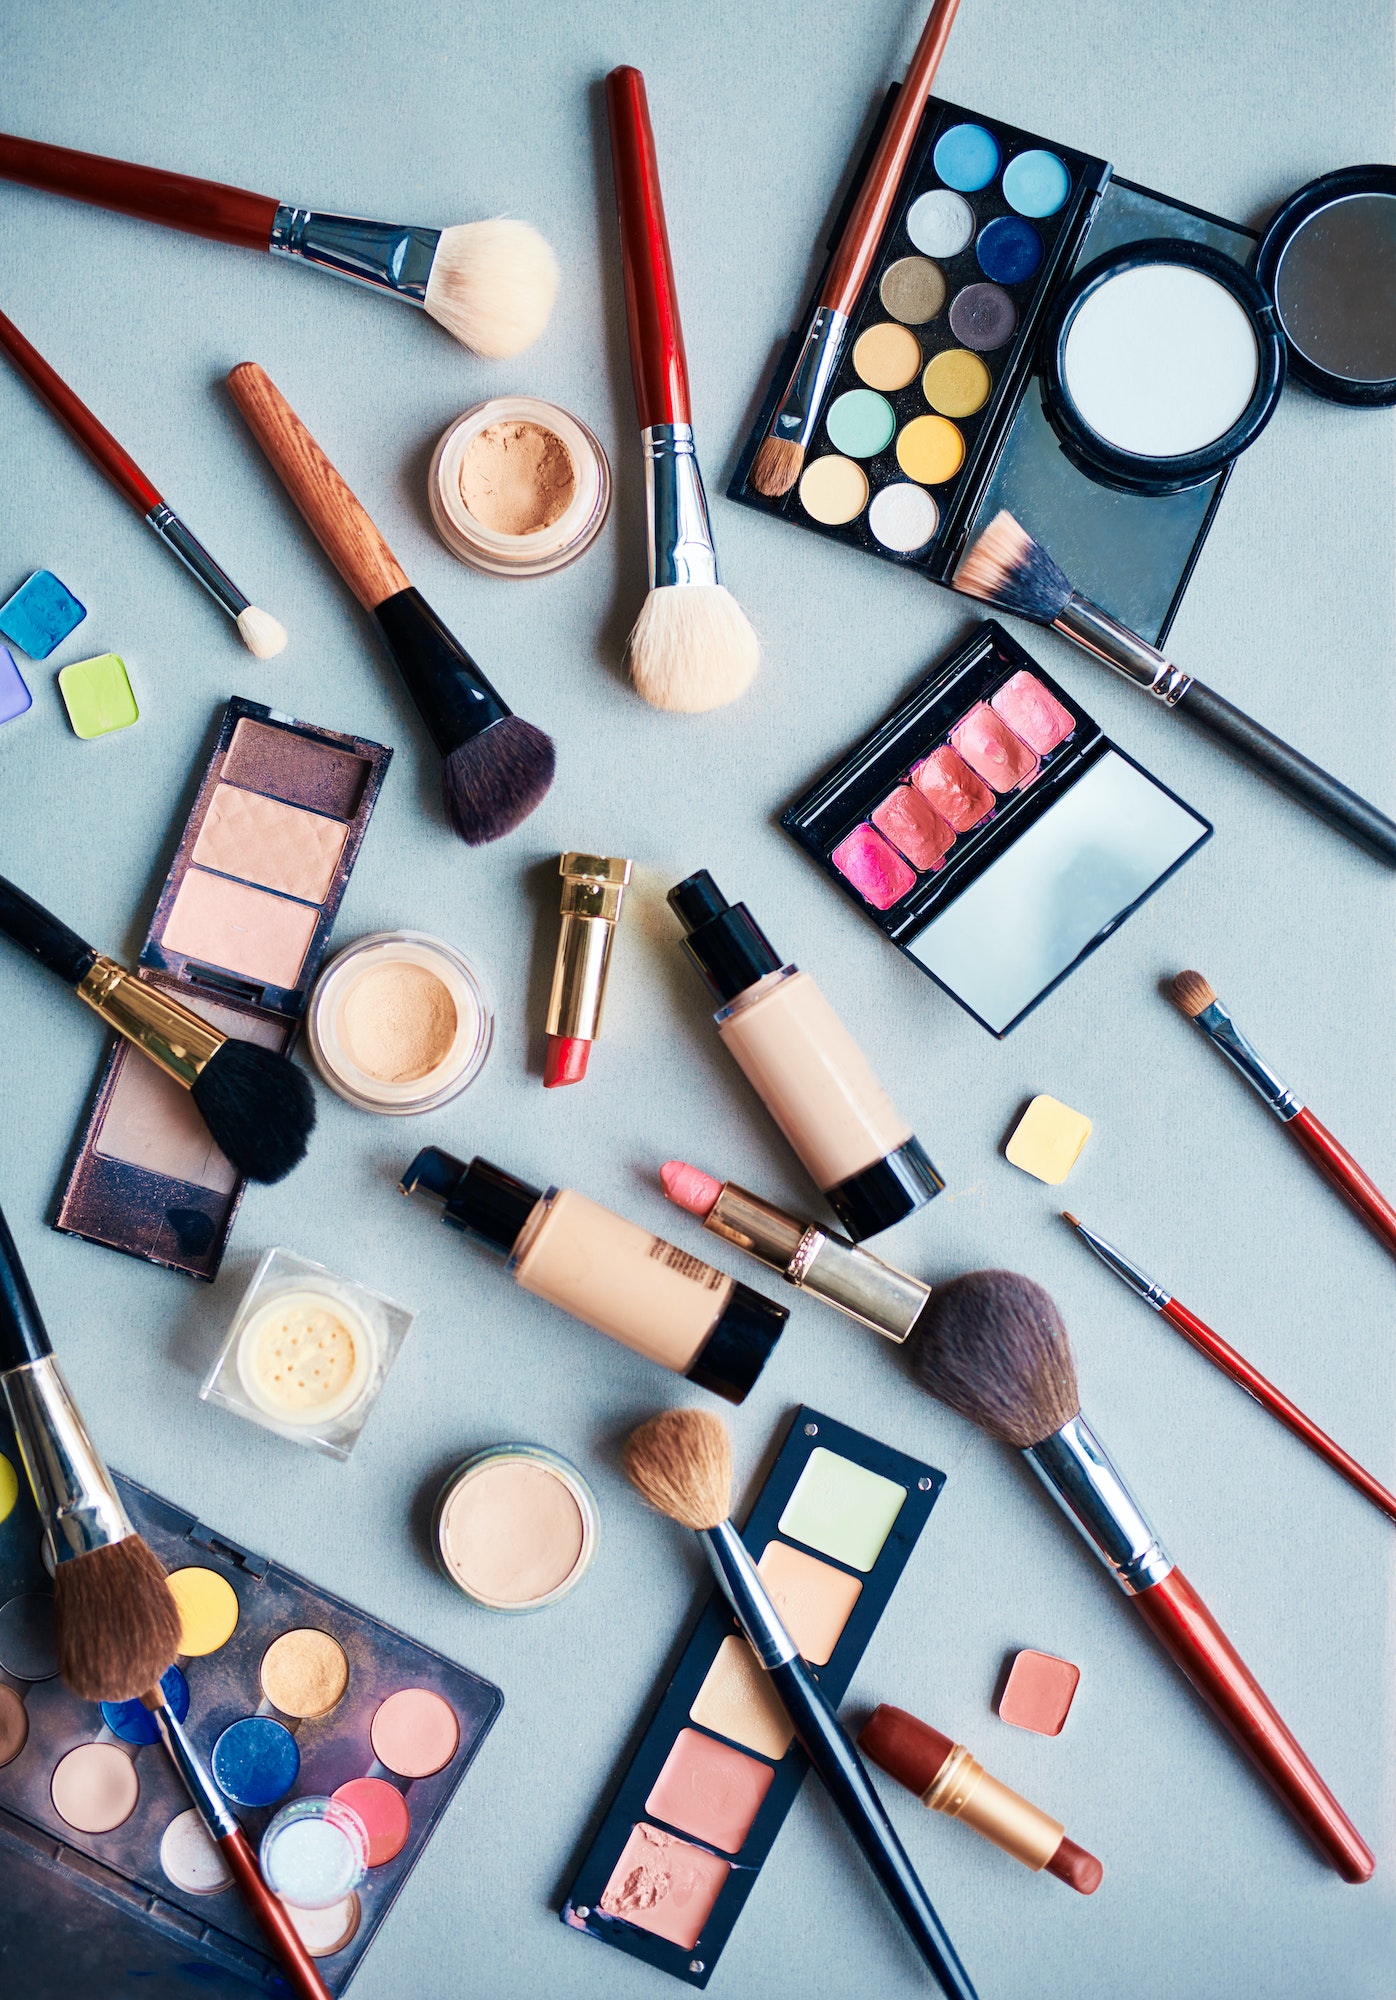 Objects for makeup